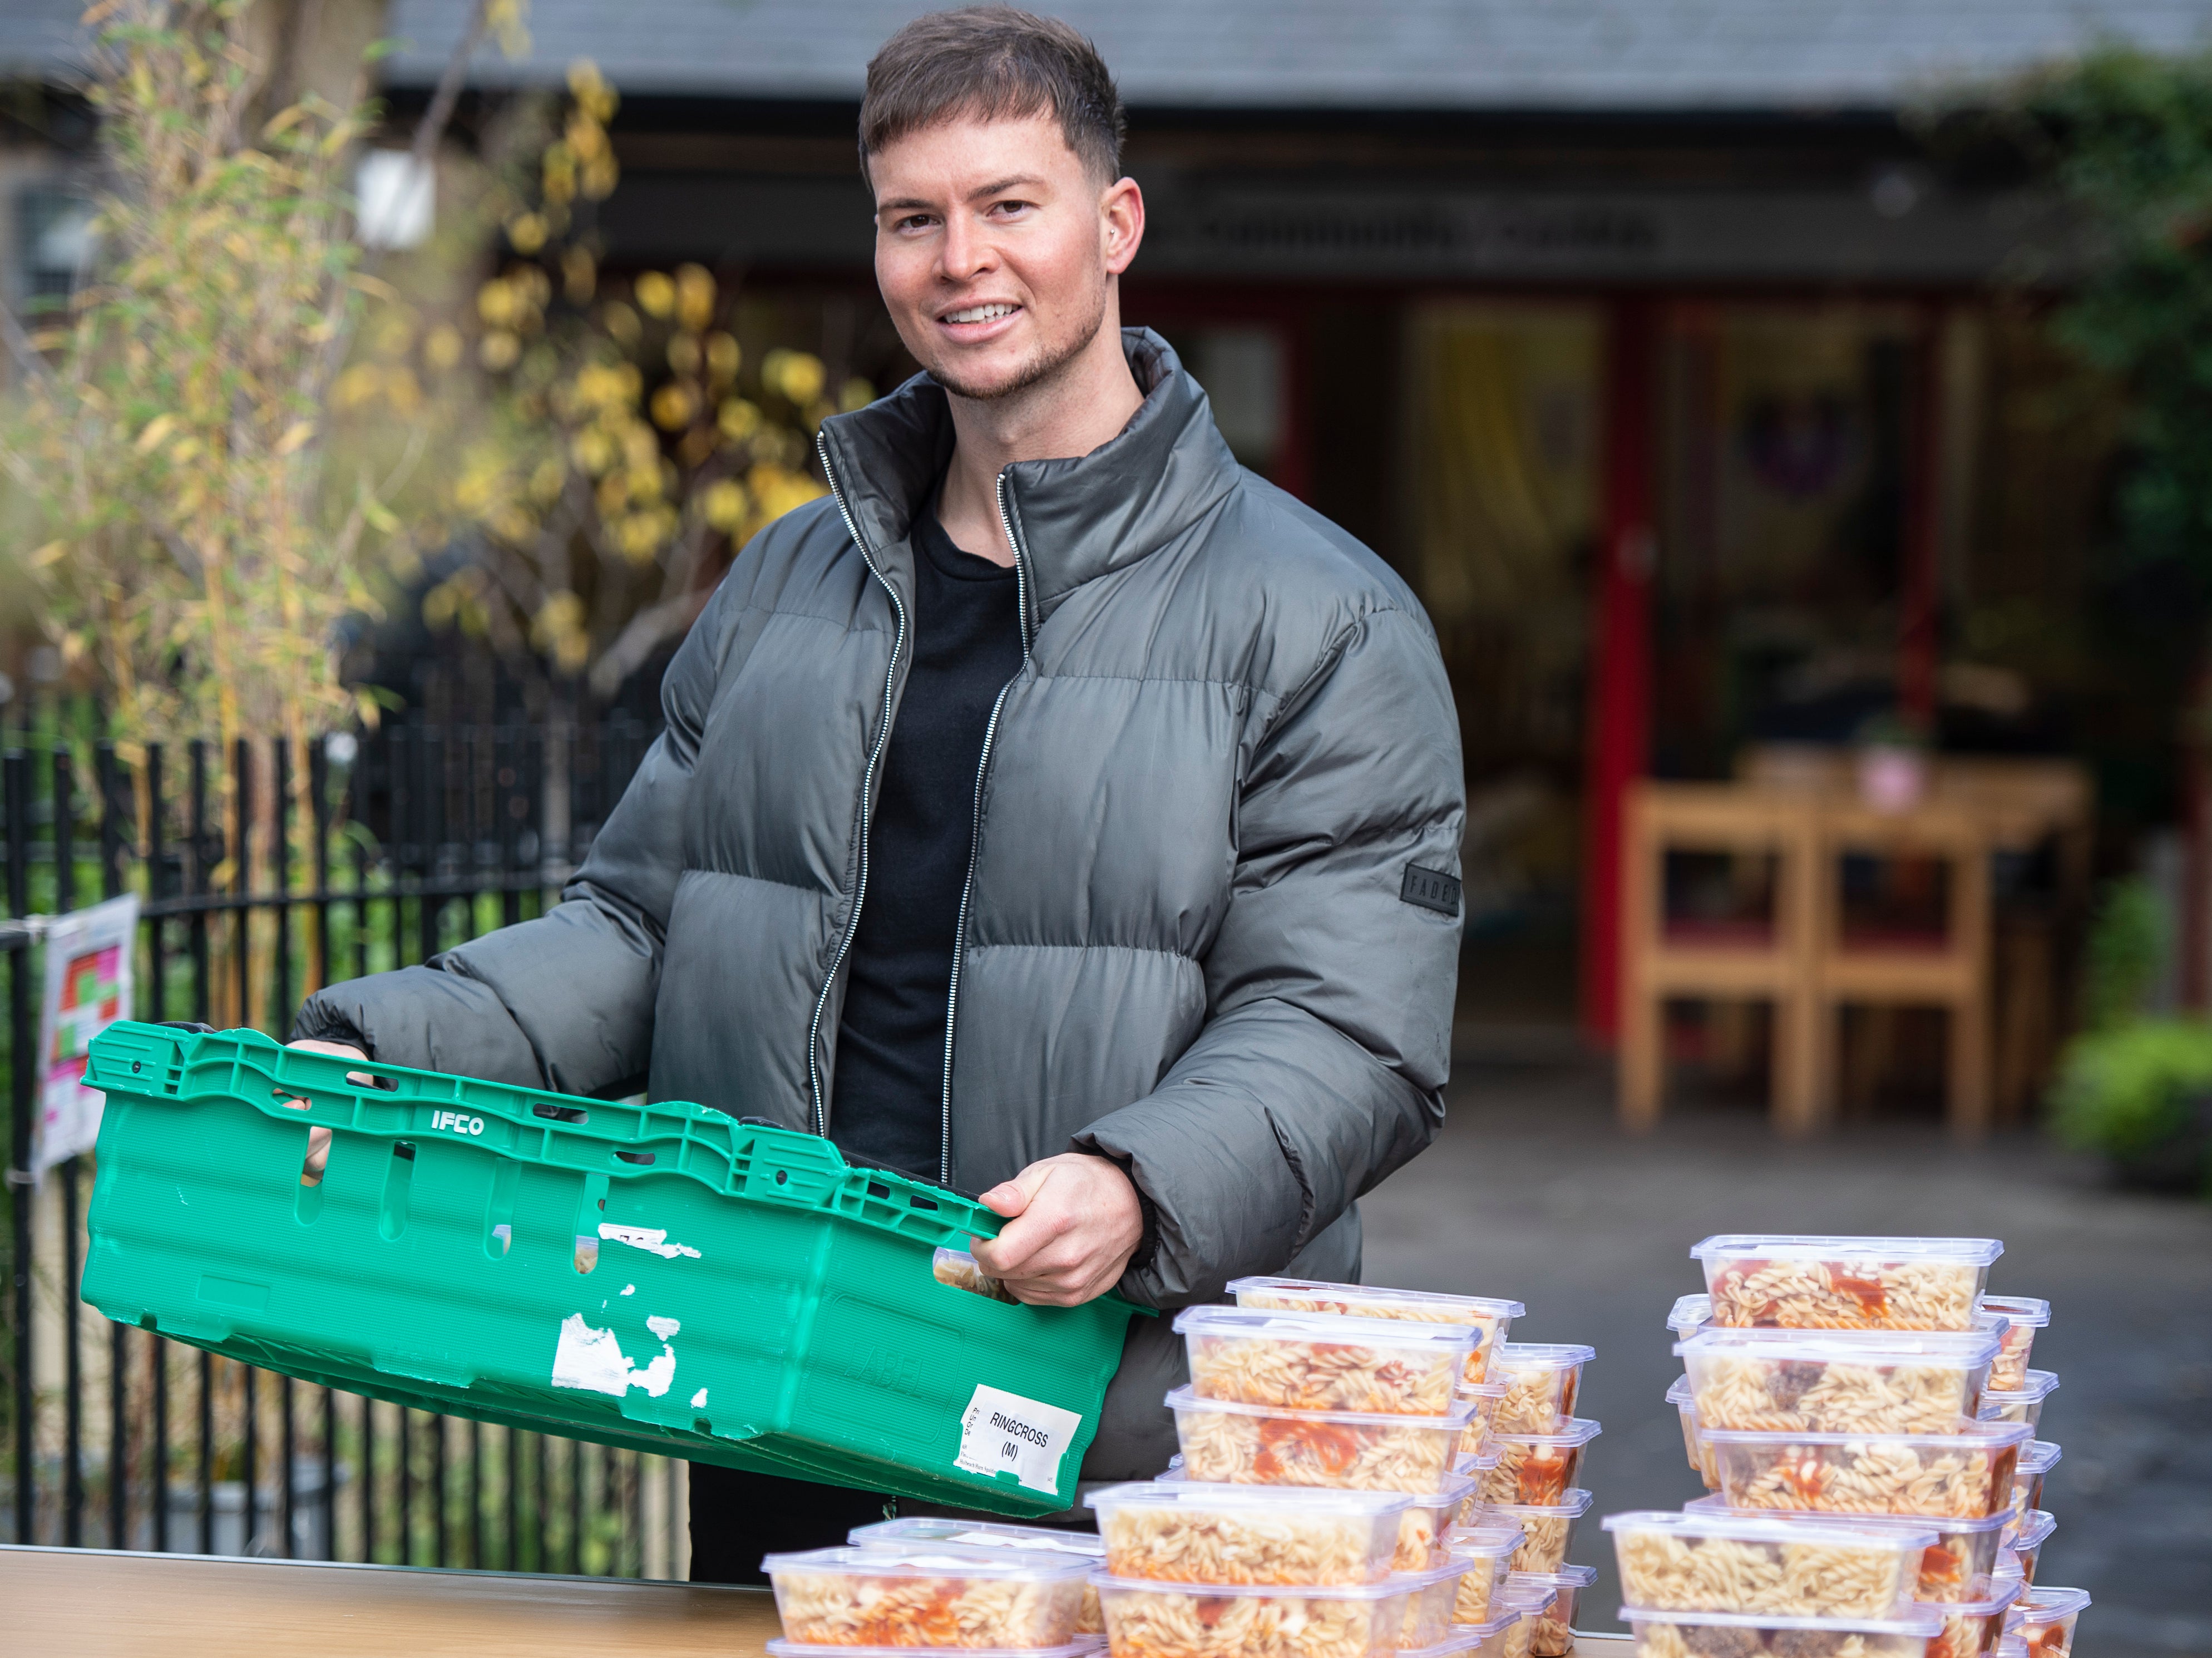 British DJ, producer and television personality, Joel Corry pictured helping distribute cooked meals at Ringcross Community Centre Foodbank